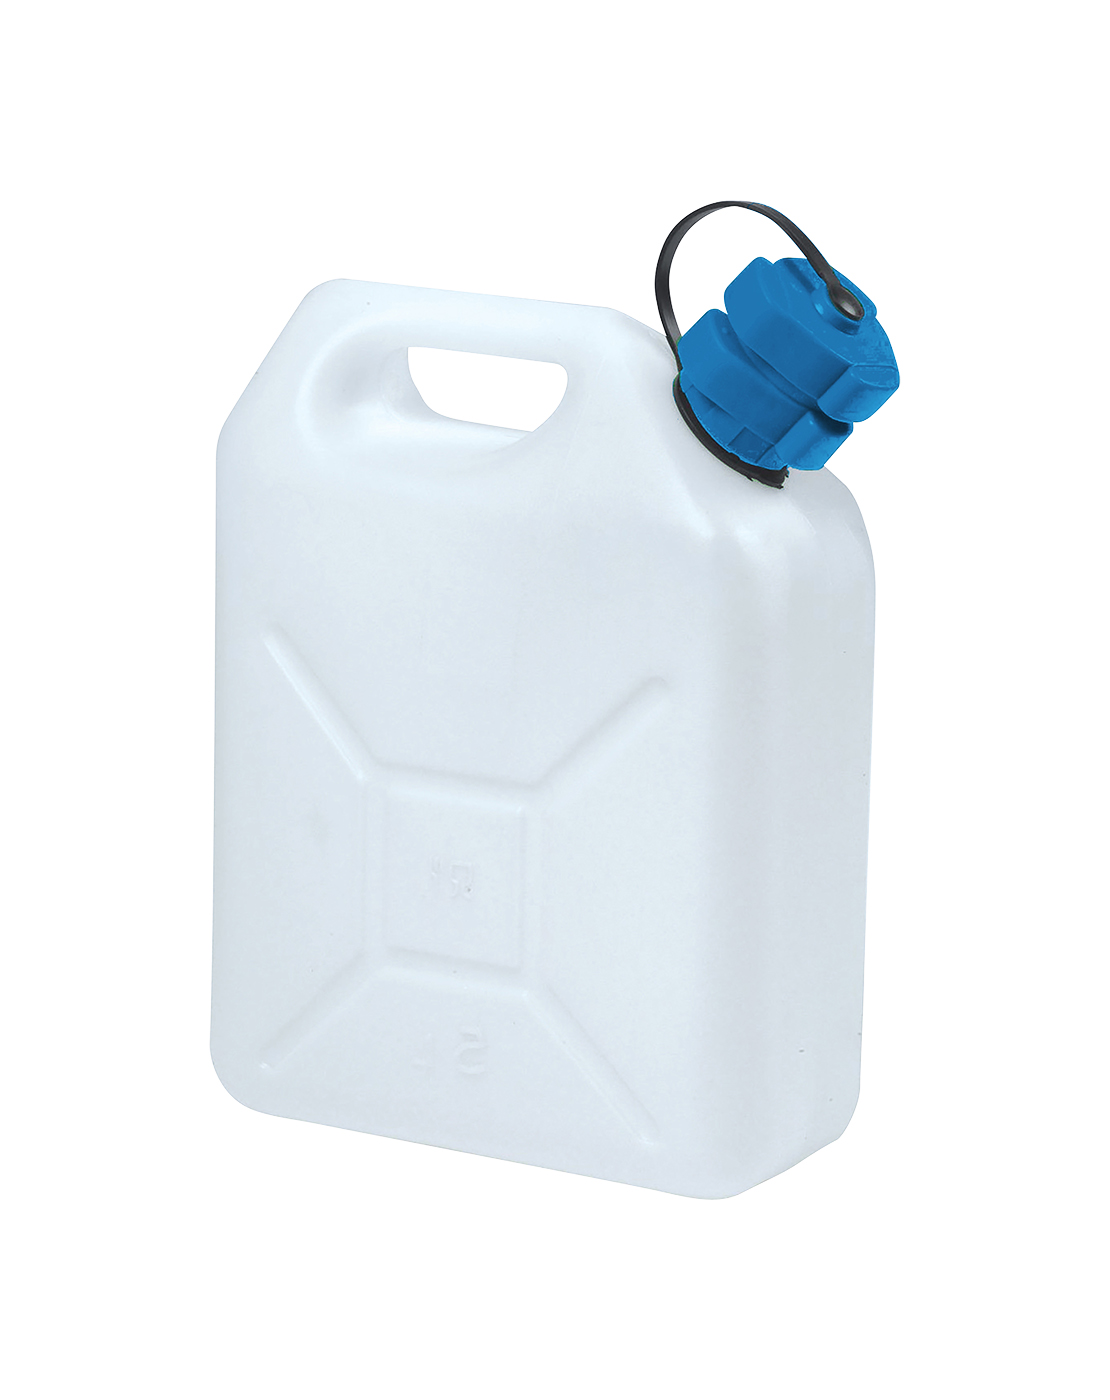 6603116 A sturdy jerrycan. Easy to use due to the sturdy handle and flexible spout. The spout can be inverted and stored inside the jerrycan after use, and the opening can be closed with the cap.